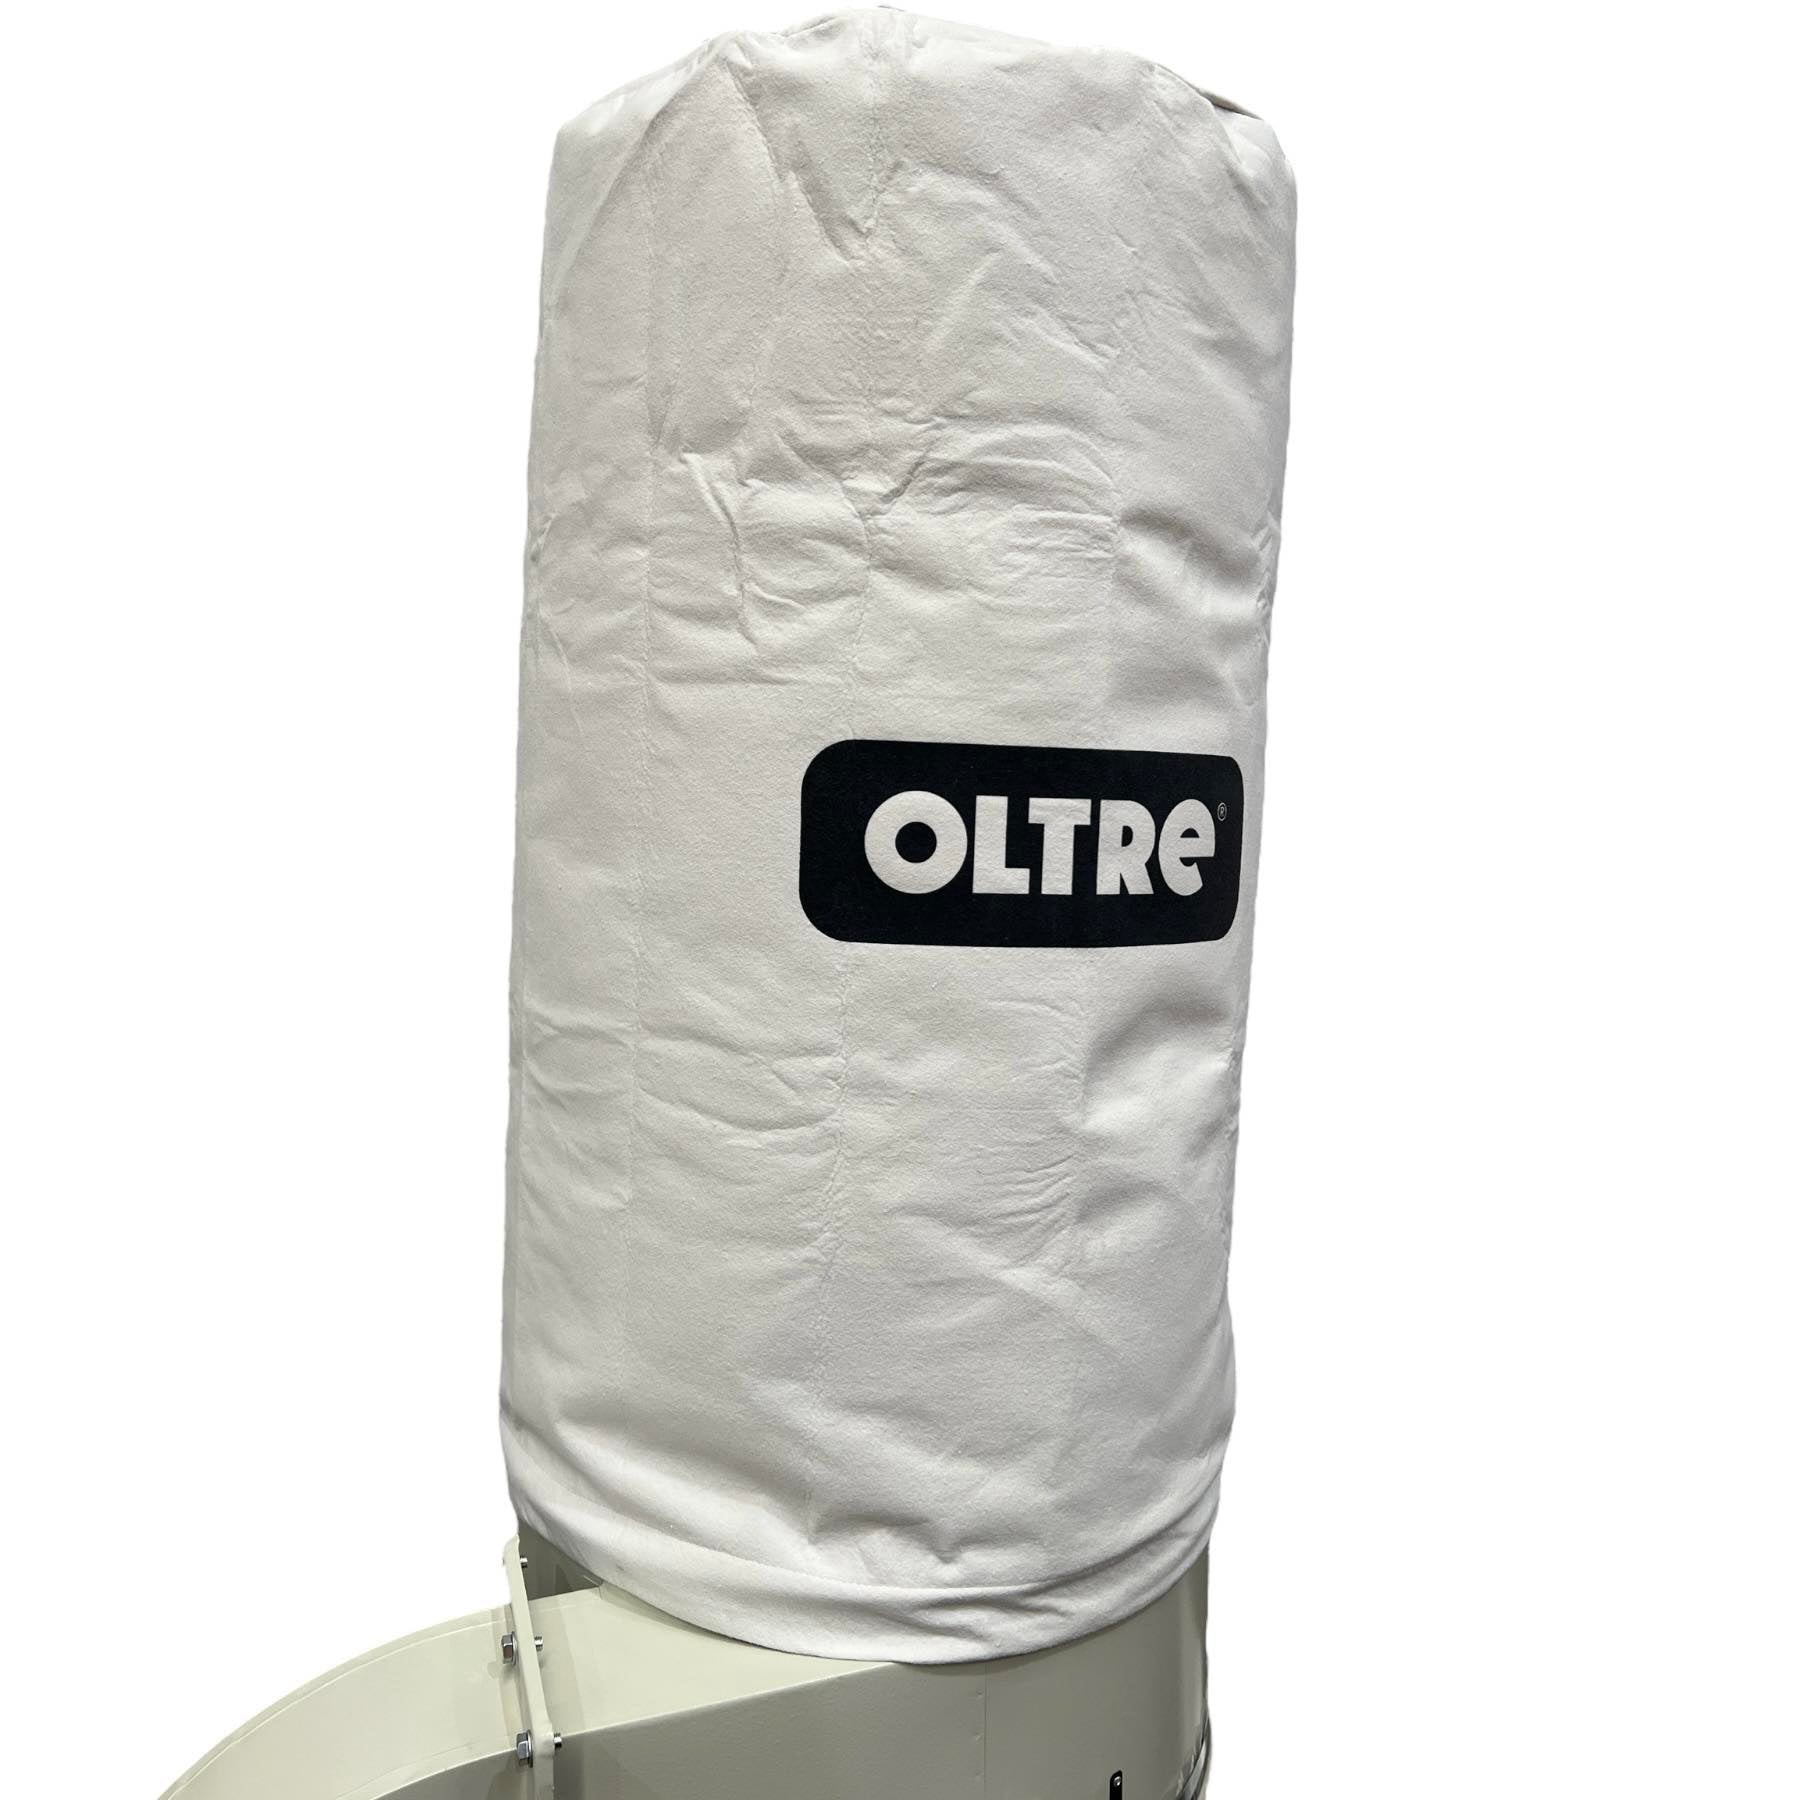 Dust Collector 415V 5HP 2 x Filter Element (2 Needlefelt Top Bags & 2 Plastic Bottom Bags) OT-DC-3800-415 by Oltre